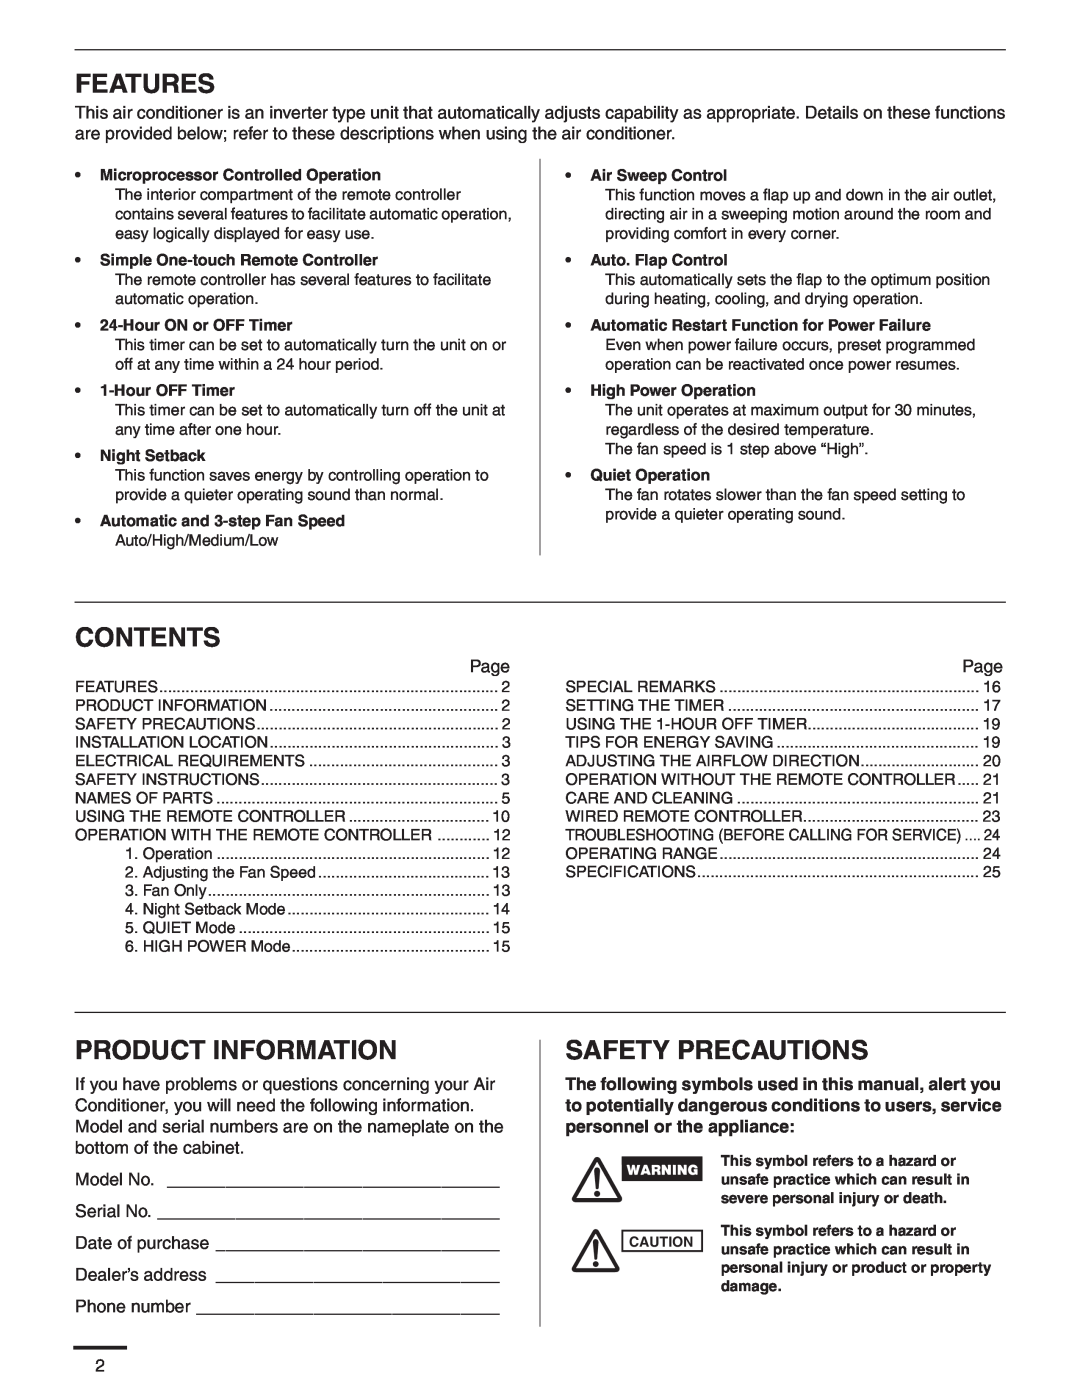 Panasonic CS-MKS9NKU Features, Contents, Product Information, Safety Precautions, Microprocessor Controlled Operation 